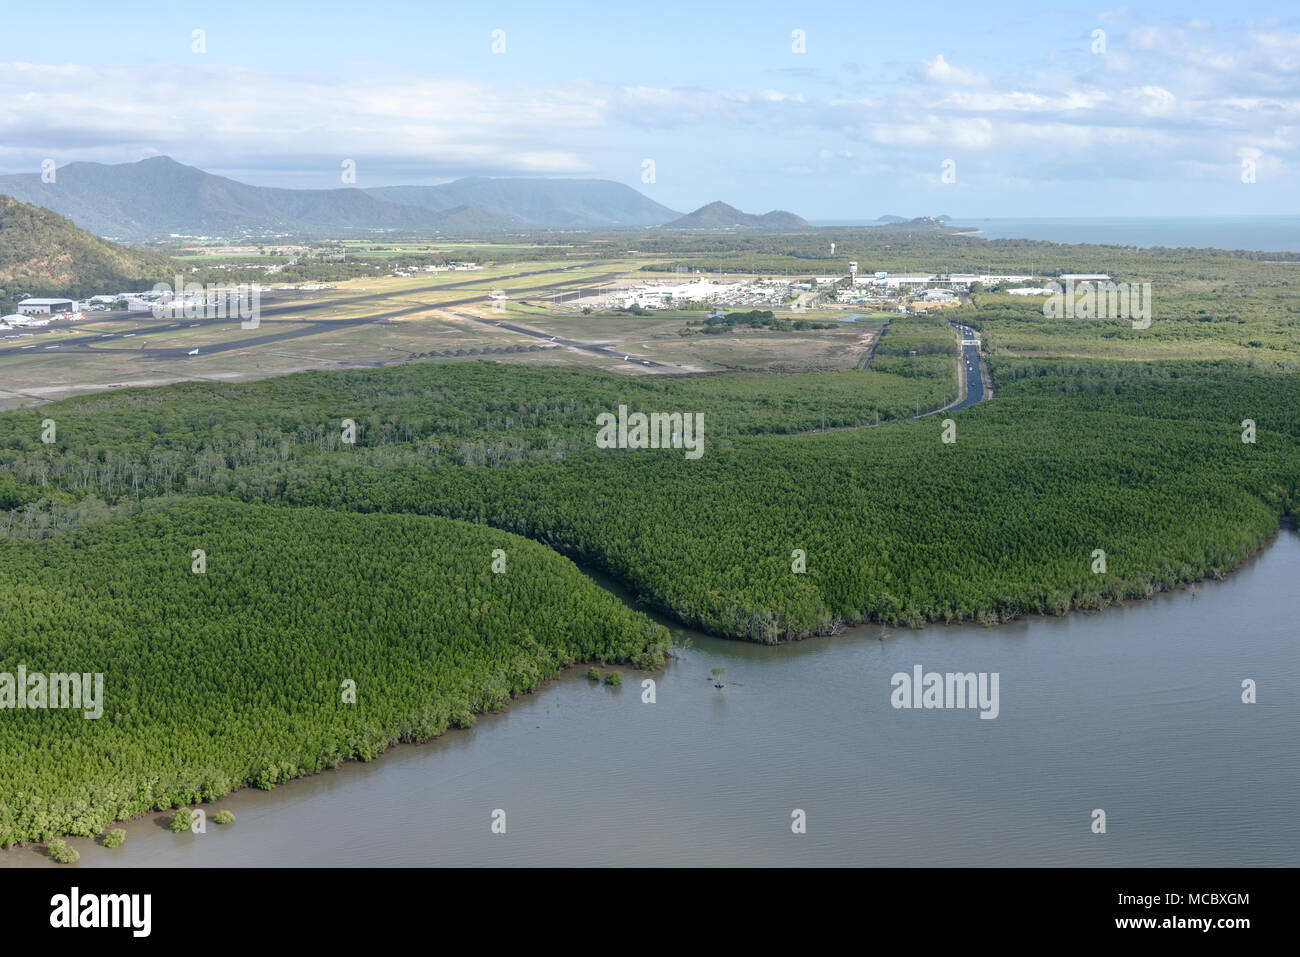 An aerial view of Cairns Airport after takeoff on a sunny day Stock Photo